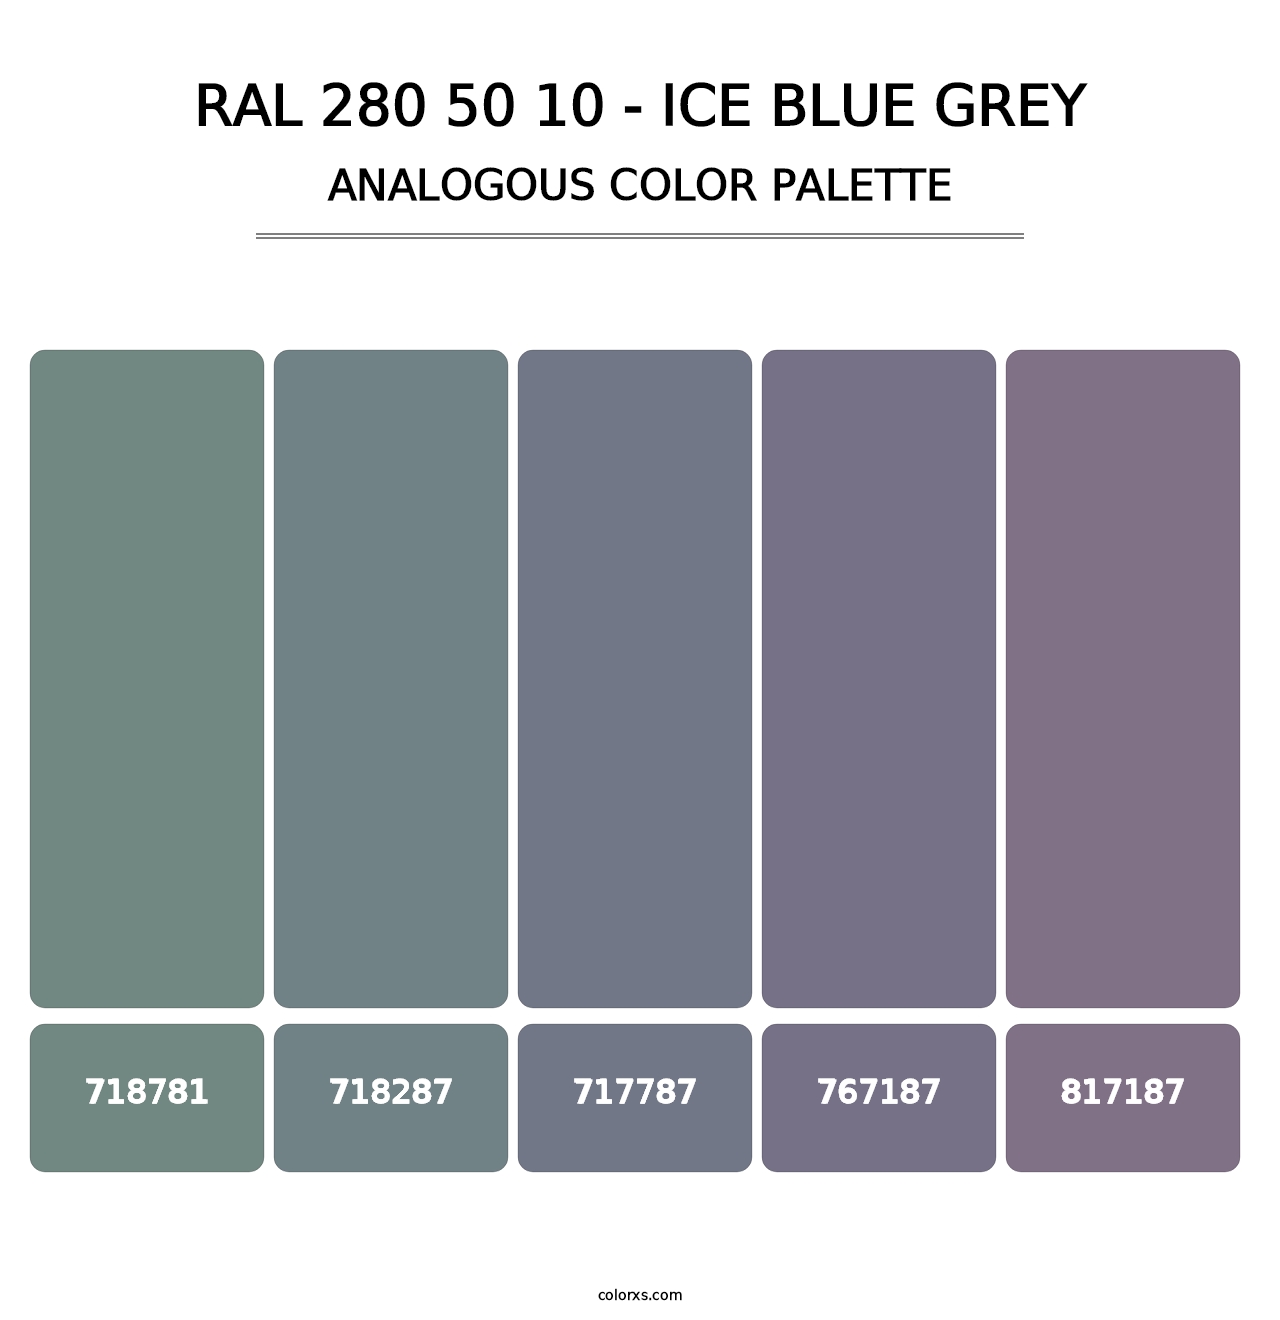 RAL 280 50 10 - Ice Blue Grey - Analogous Color Palette